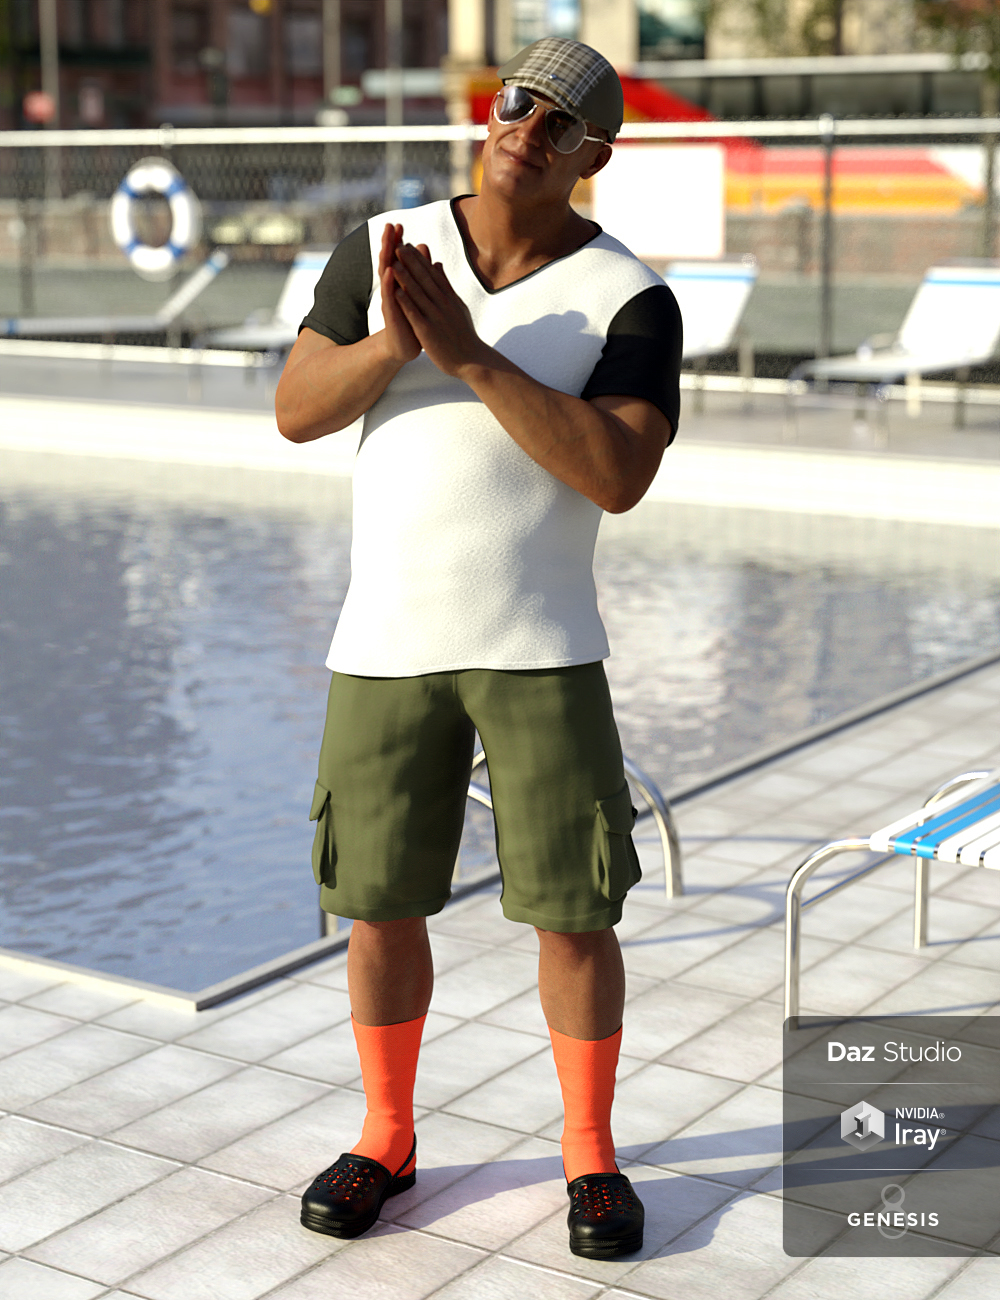 Socks In Krokz Outfit Textures by: Moonscape GraphicsSade, 3D Models by Daz 3D